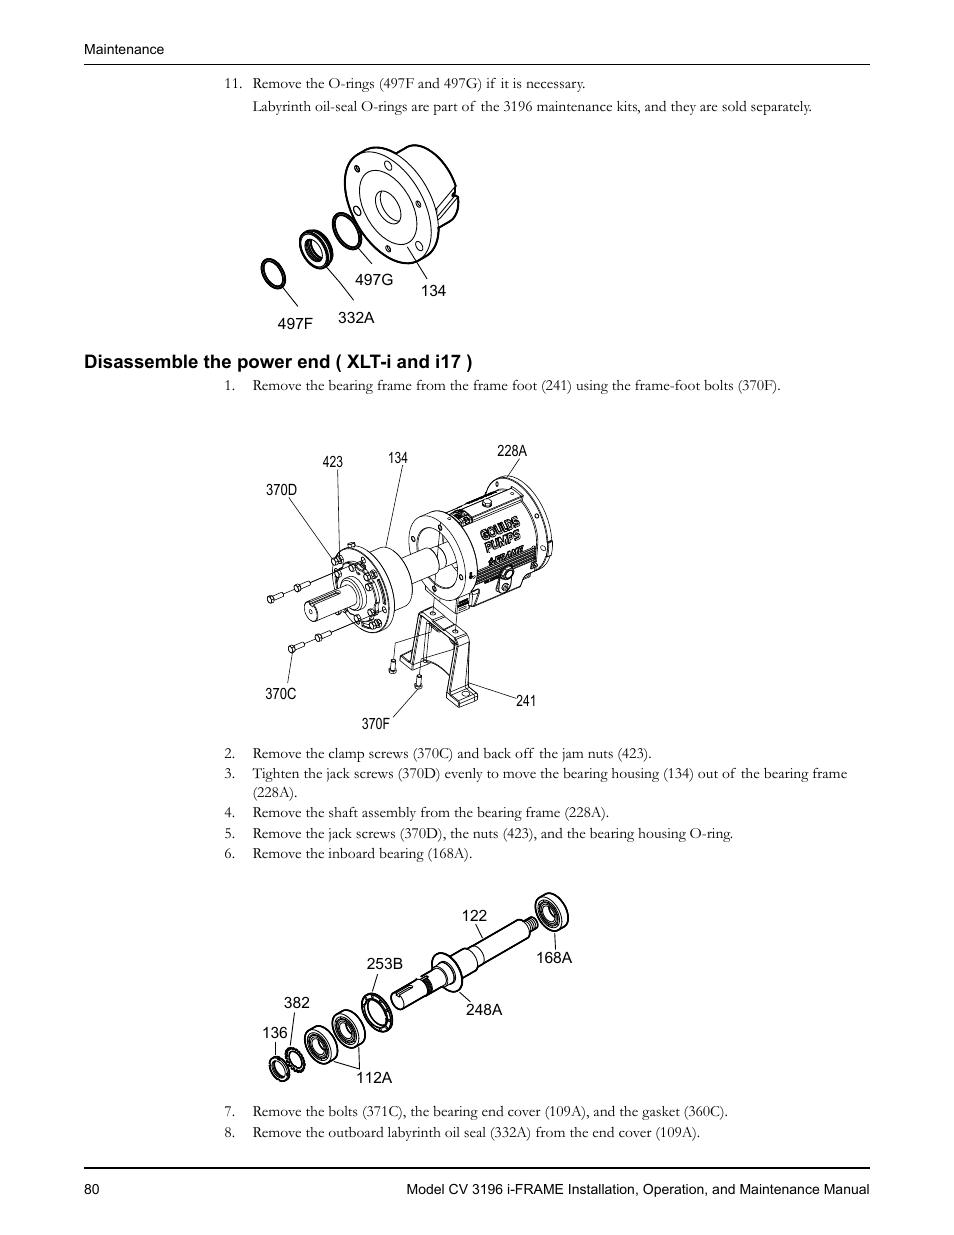 Disassemble the power end ( xlt-i and i17 ) | Goulds Pumps CV 3196 i-FRAME - IOM User Manual | Page 82 / 152